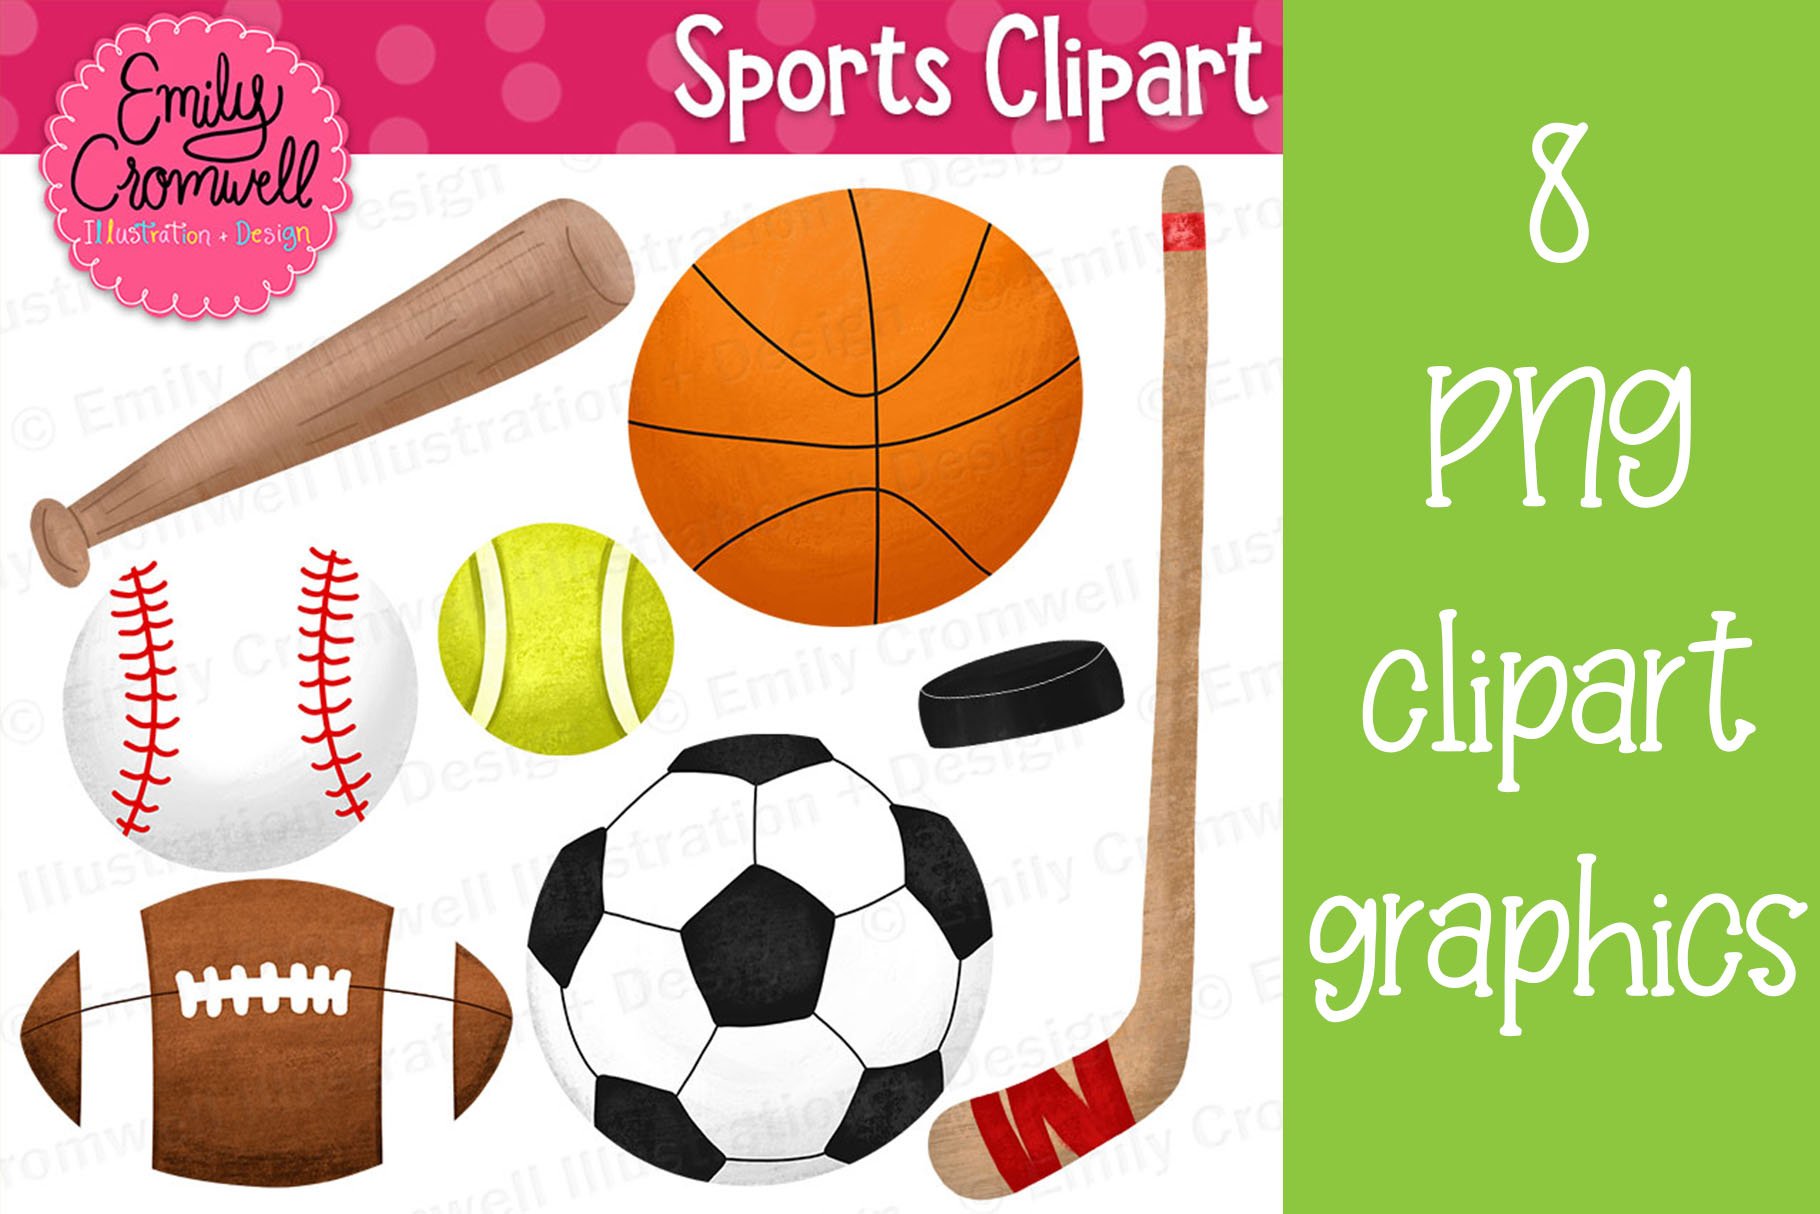 Sports Digital Clipart cover image.